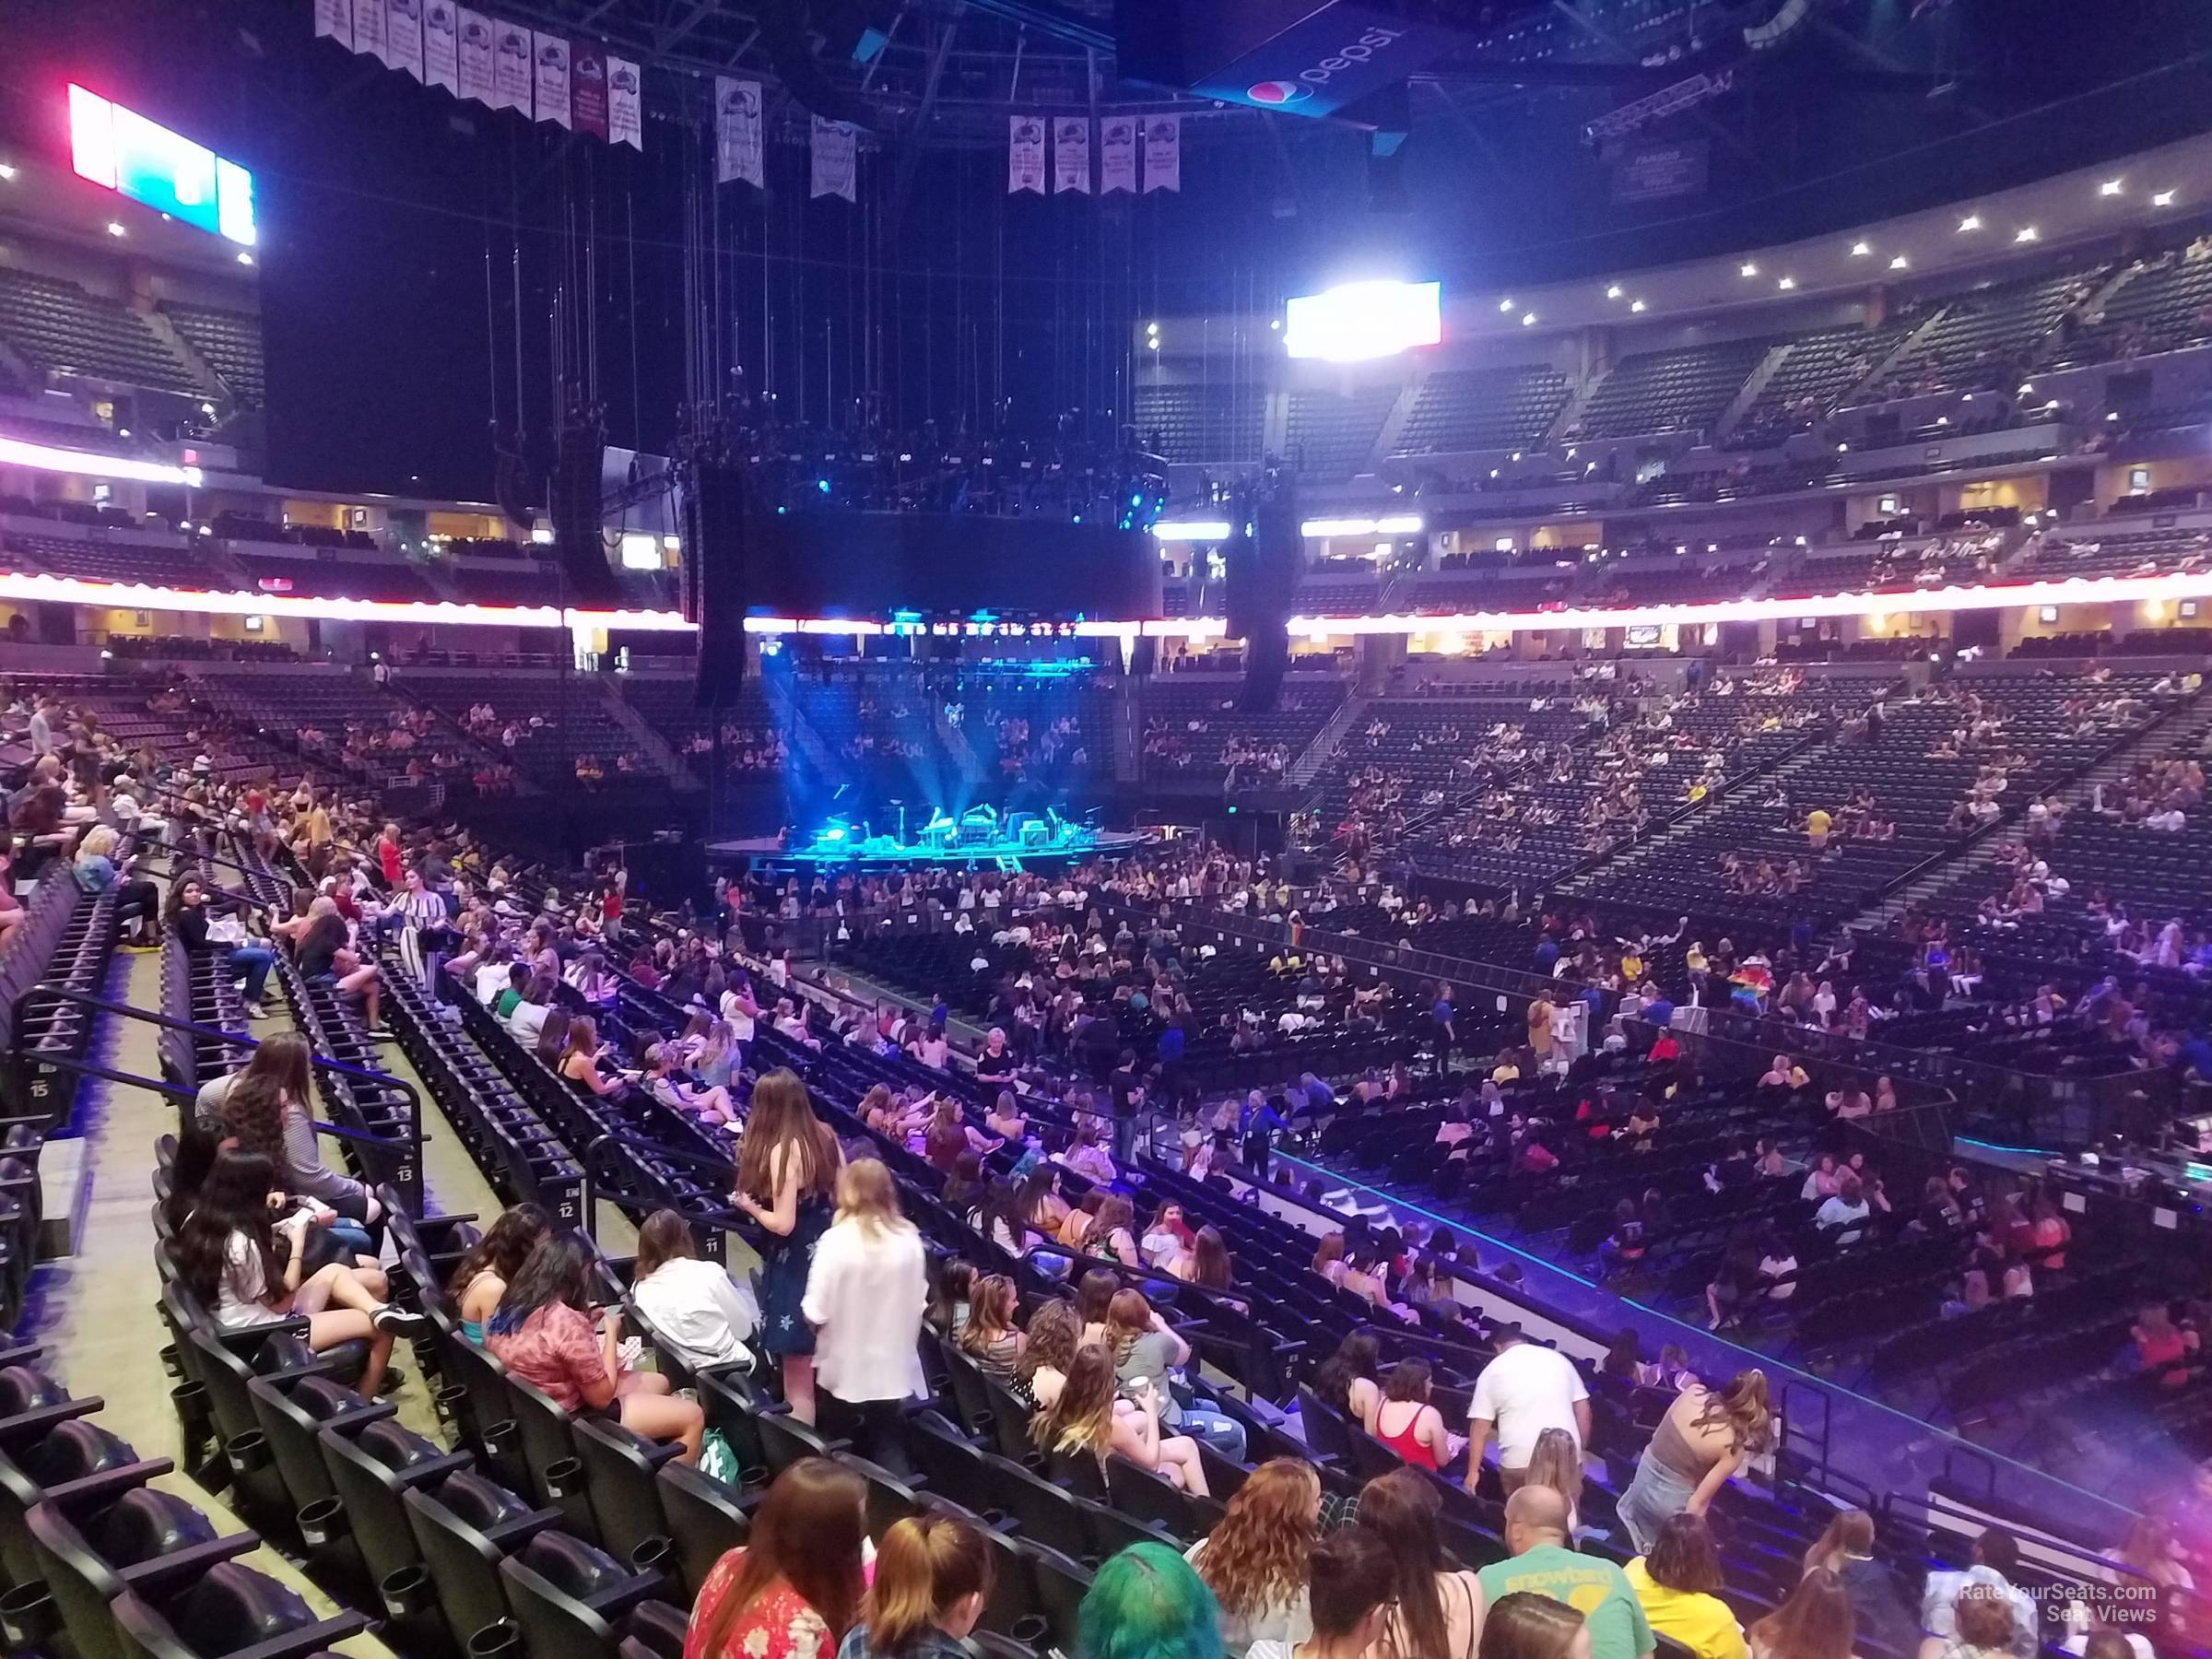 Pepsi Center Section 120 Concert Seating - RateYourSeats.com2400 x 1800